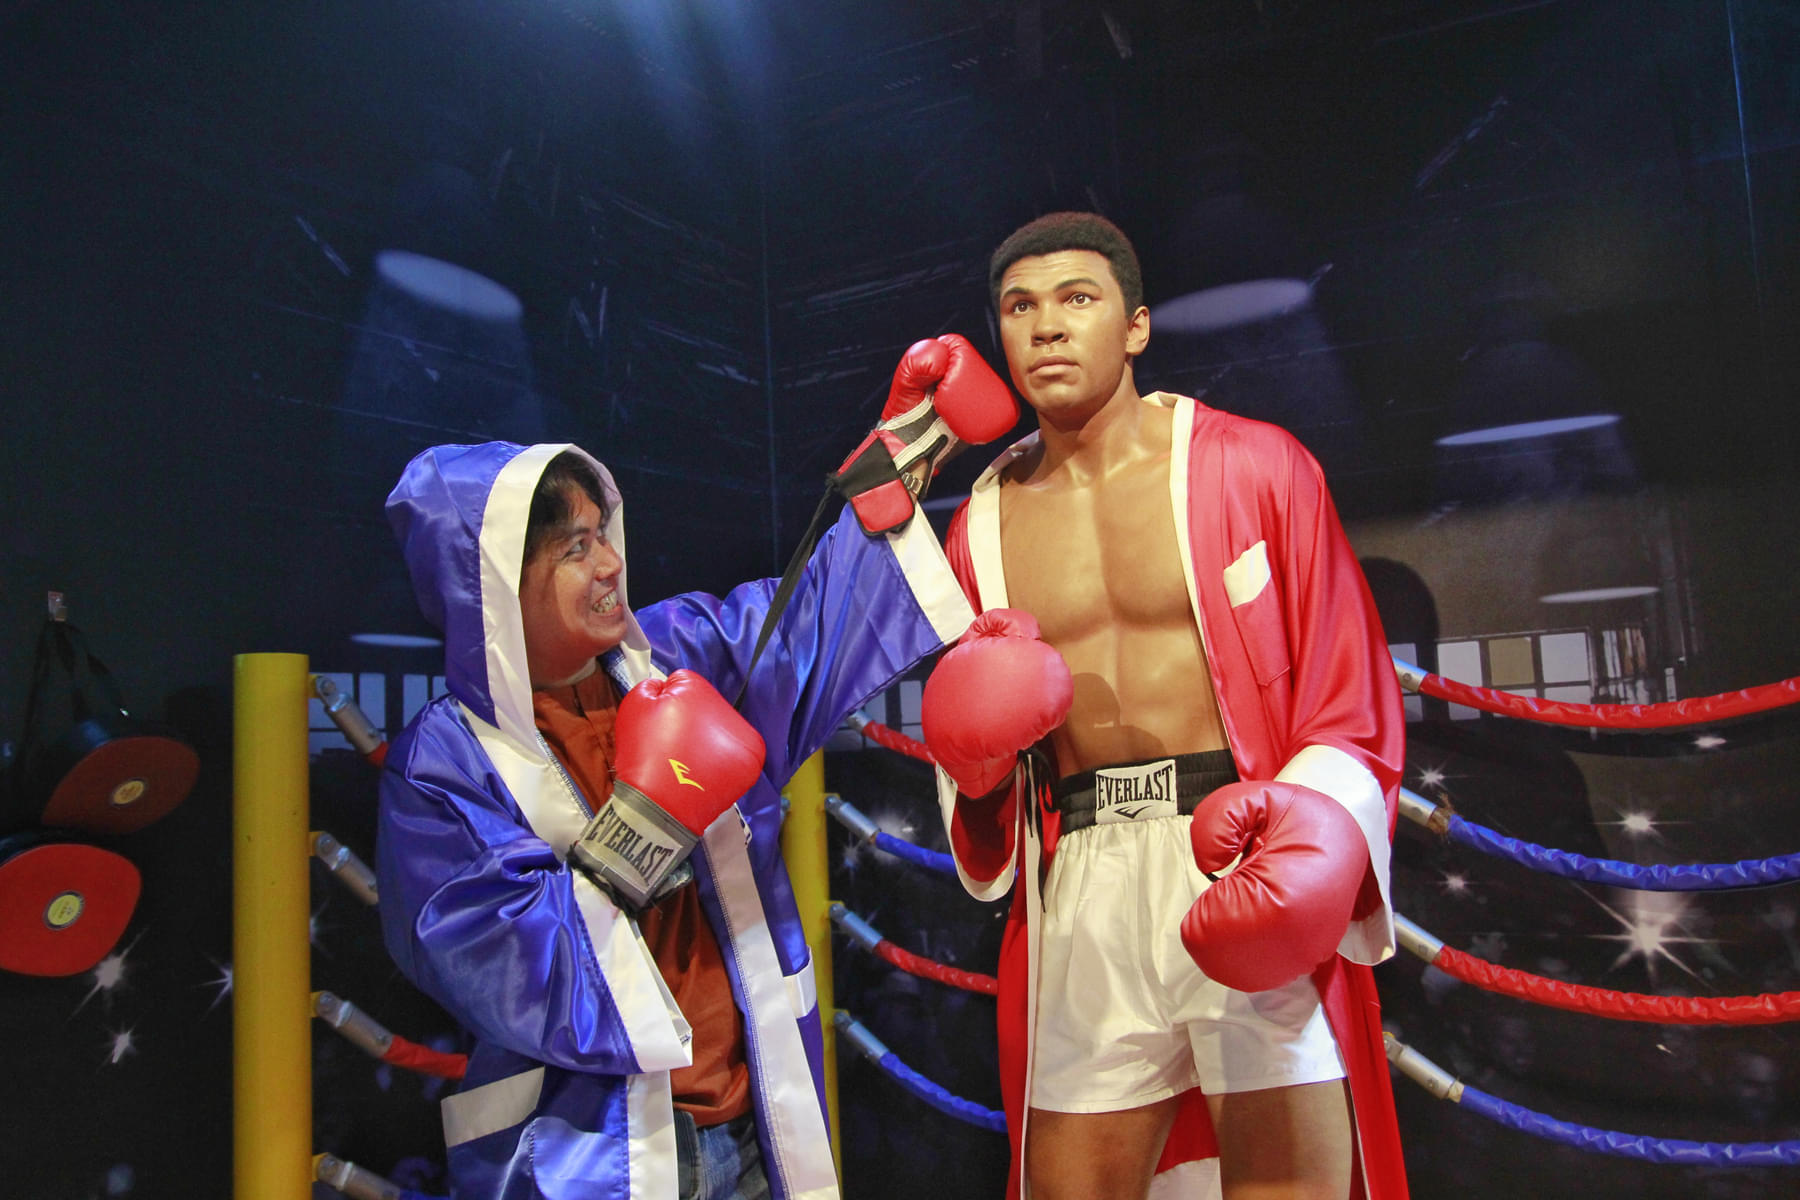 See the wax statue of Muhammad Ali, one of the greatest boxer in America